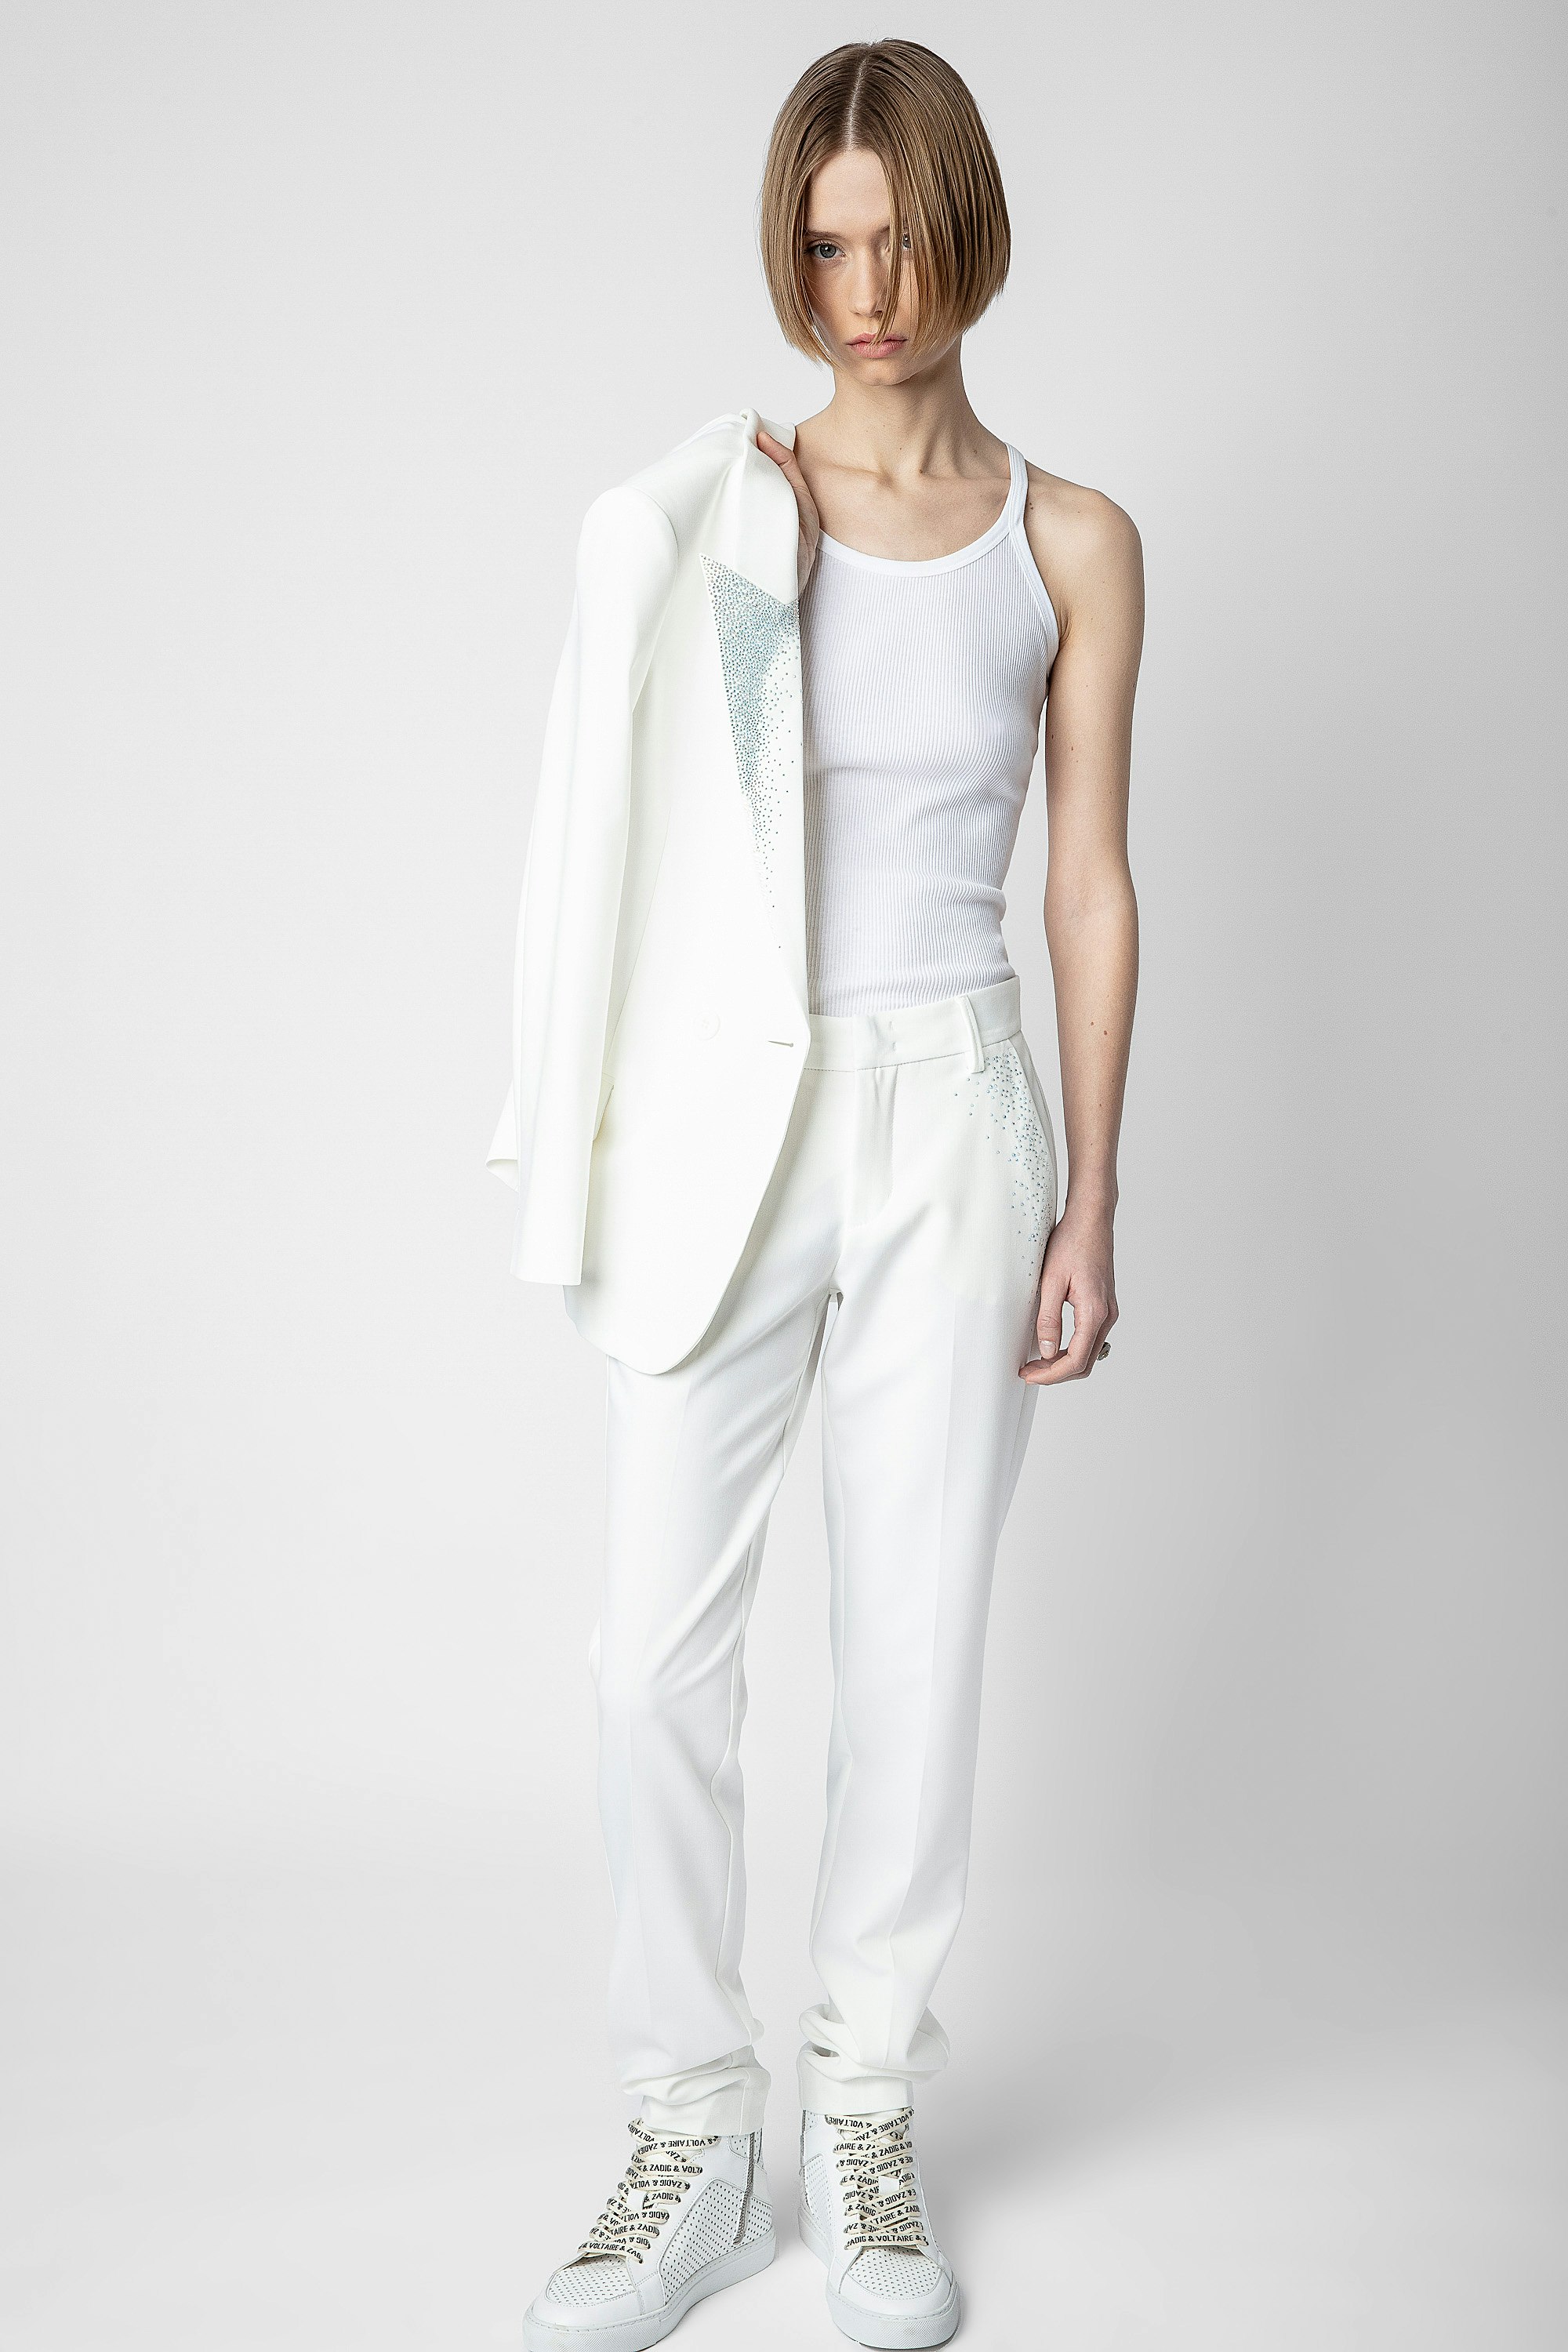 Prune Trousers - Women's off-white tailored trousers with rhinestones